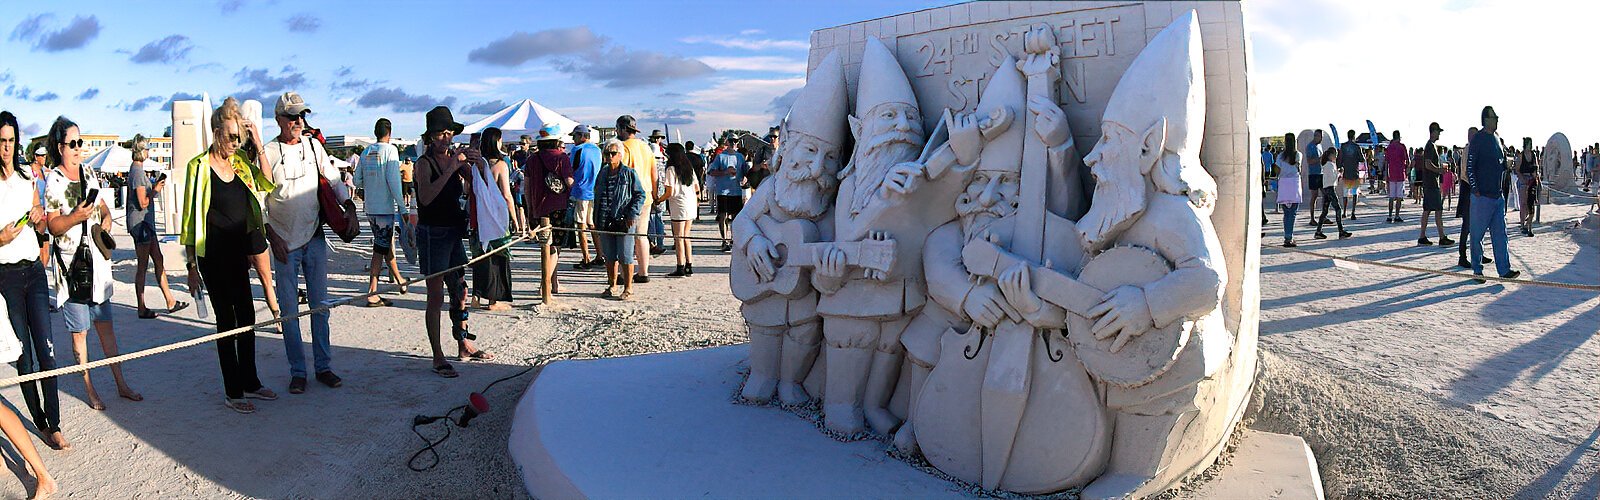 The sculptures are made with sand brought from South Florida that has special characteristics necessary for sculpting such detailed work as “Metro Gnomes” by Abe Waterman of Prince Edward Island, Canada.